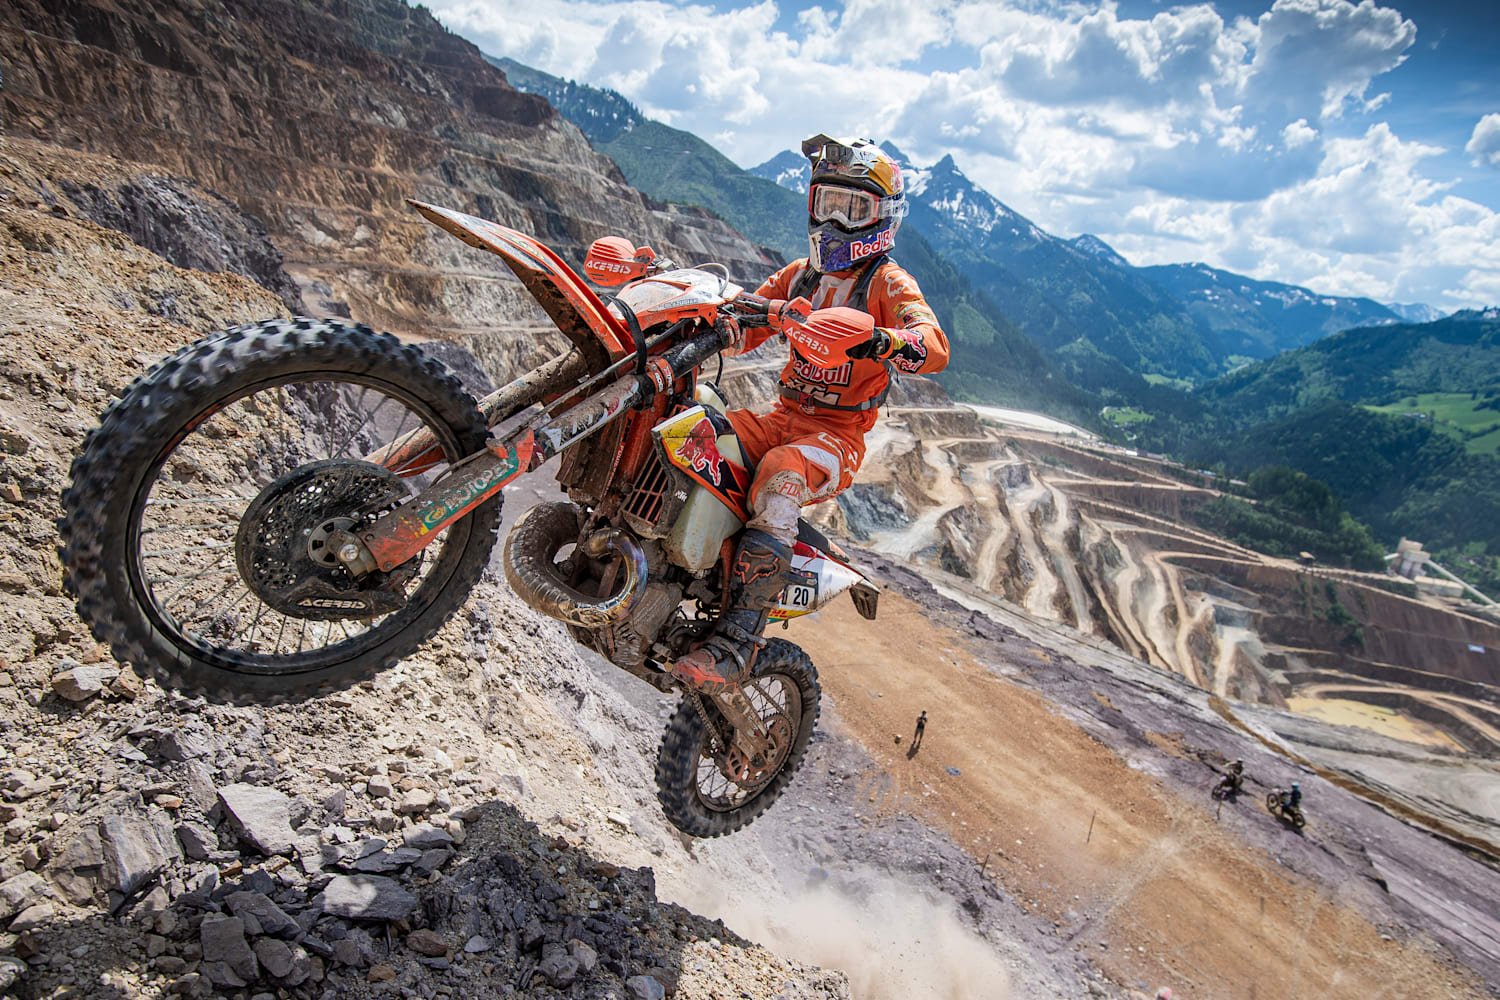 Erzbergrodeo Red Bull Hare Scramble 19 Live Event